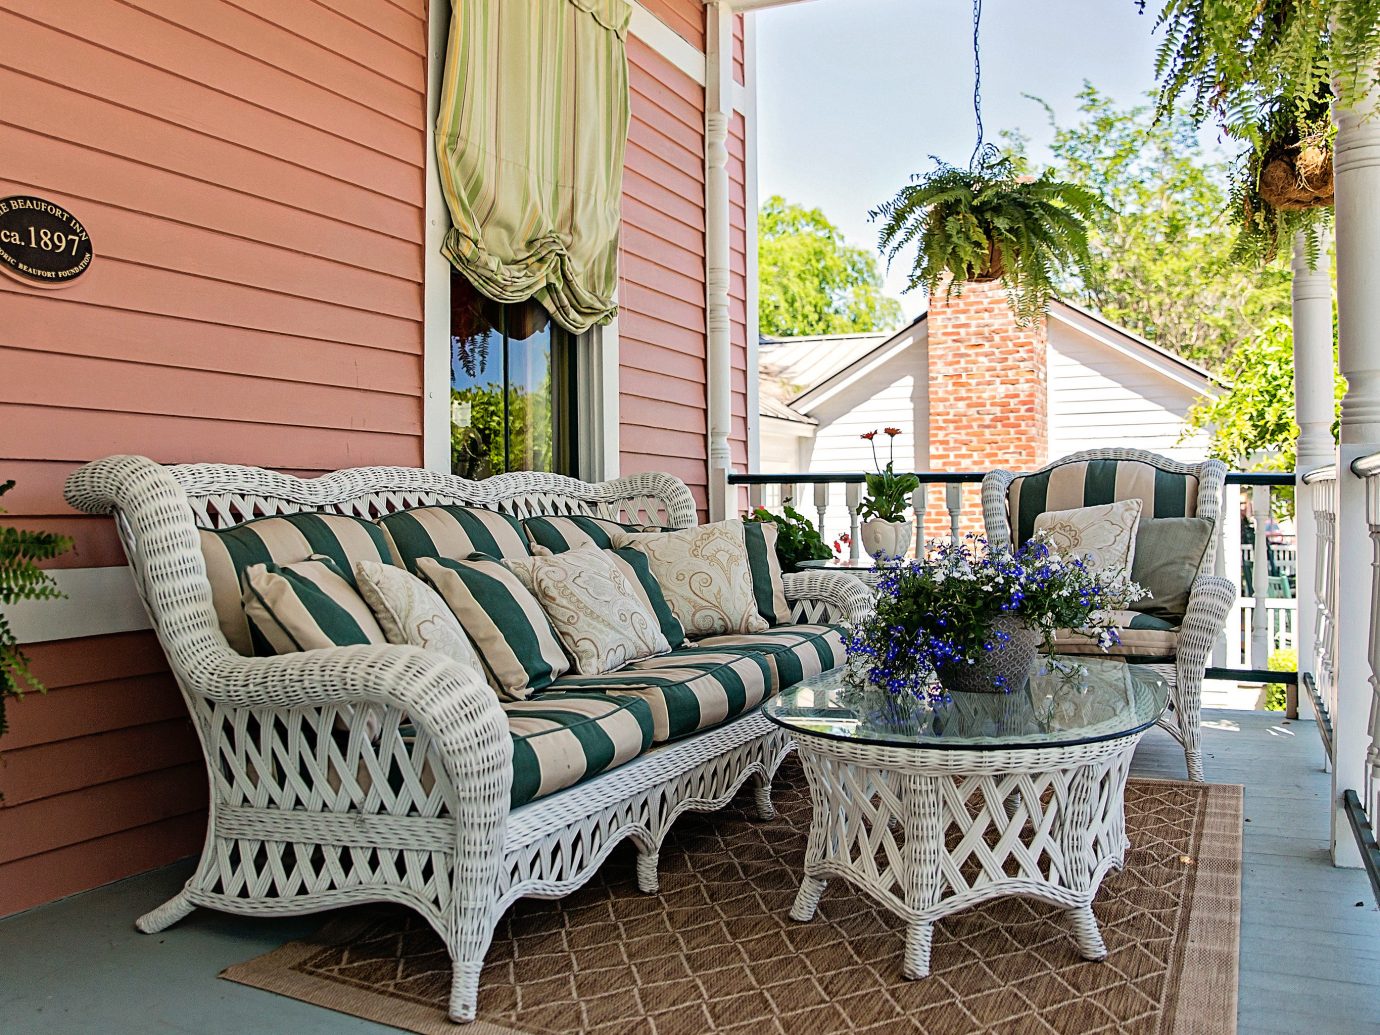 Balcony Country Deck Inn Living Lounge Trip Ideas property room porch estate home backyard outdoor structure cottage interior design real estate Villa living room Patio mansion Garden furniture stone